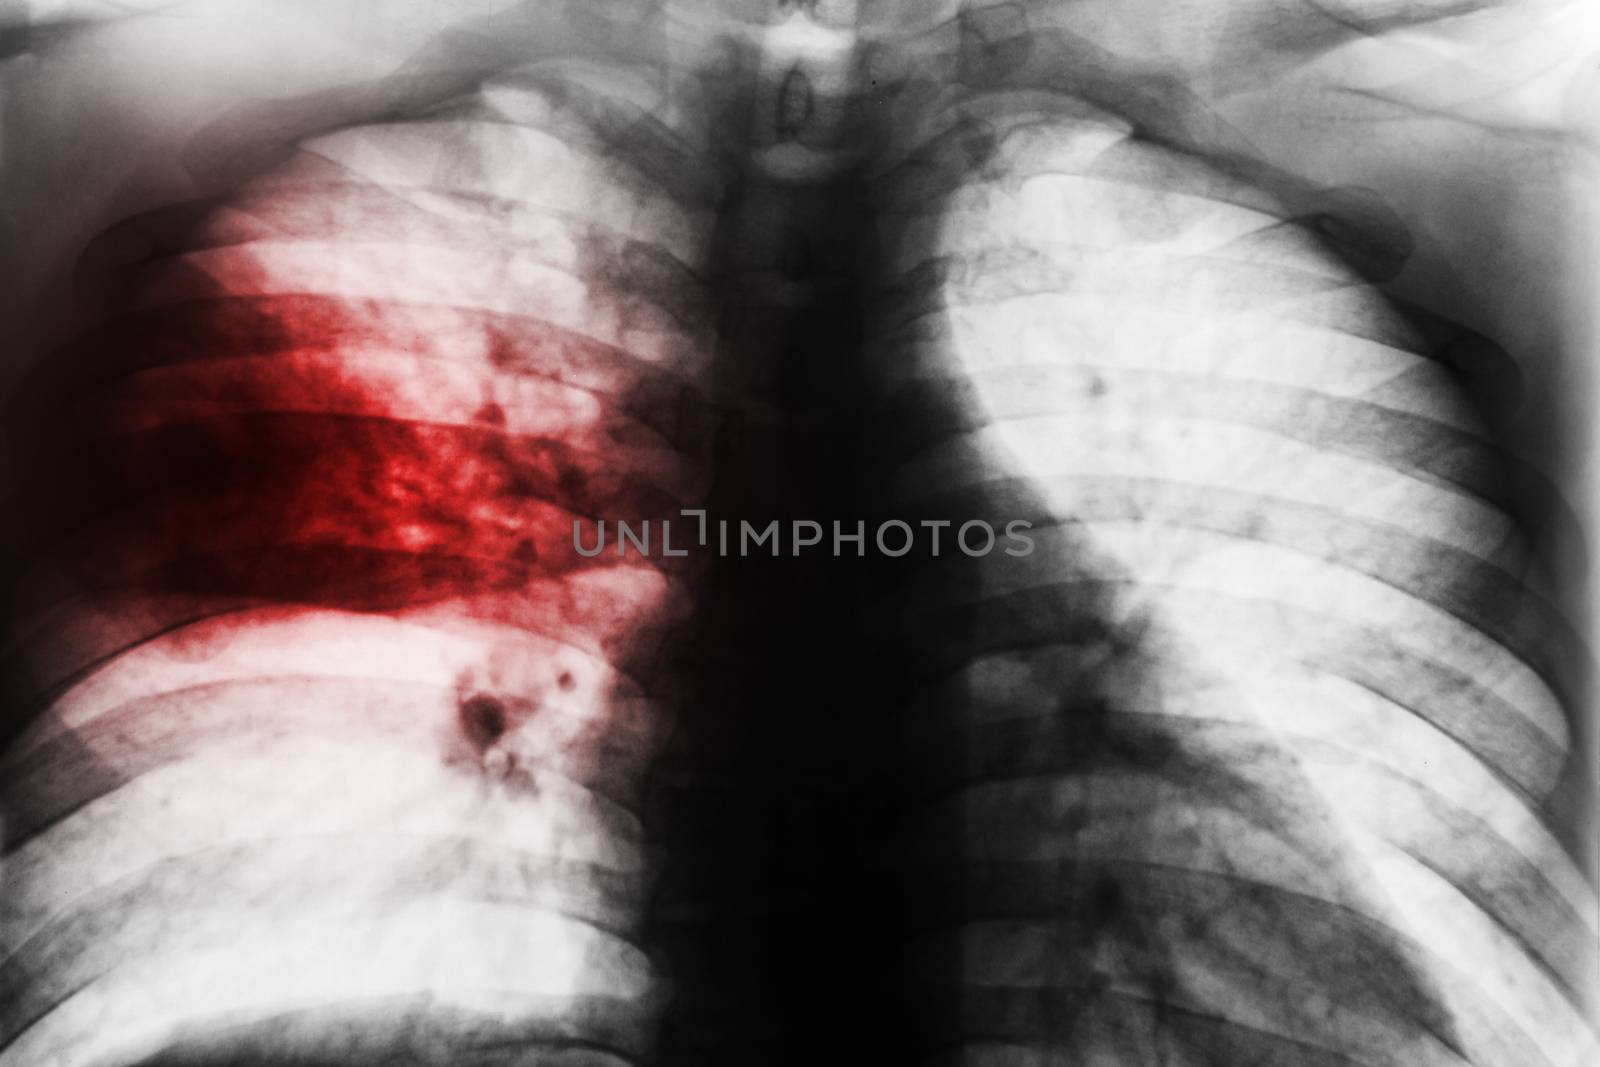 Lobar Pneumonia . Film chest x-ray show patchy infiltrate at right middle lung from Mycobacterium tuberculosis infection ( Pulmonary tuberculosis ) .